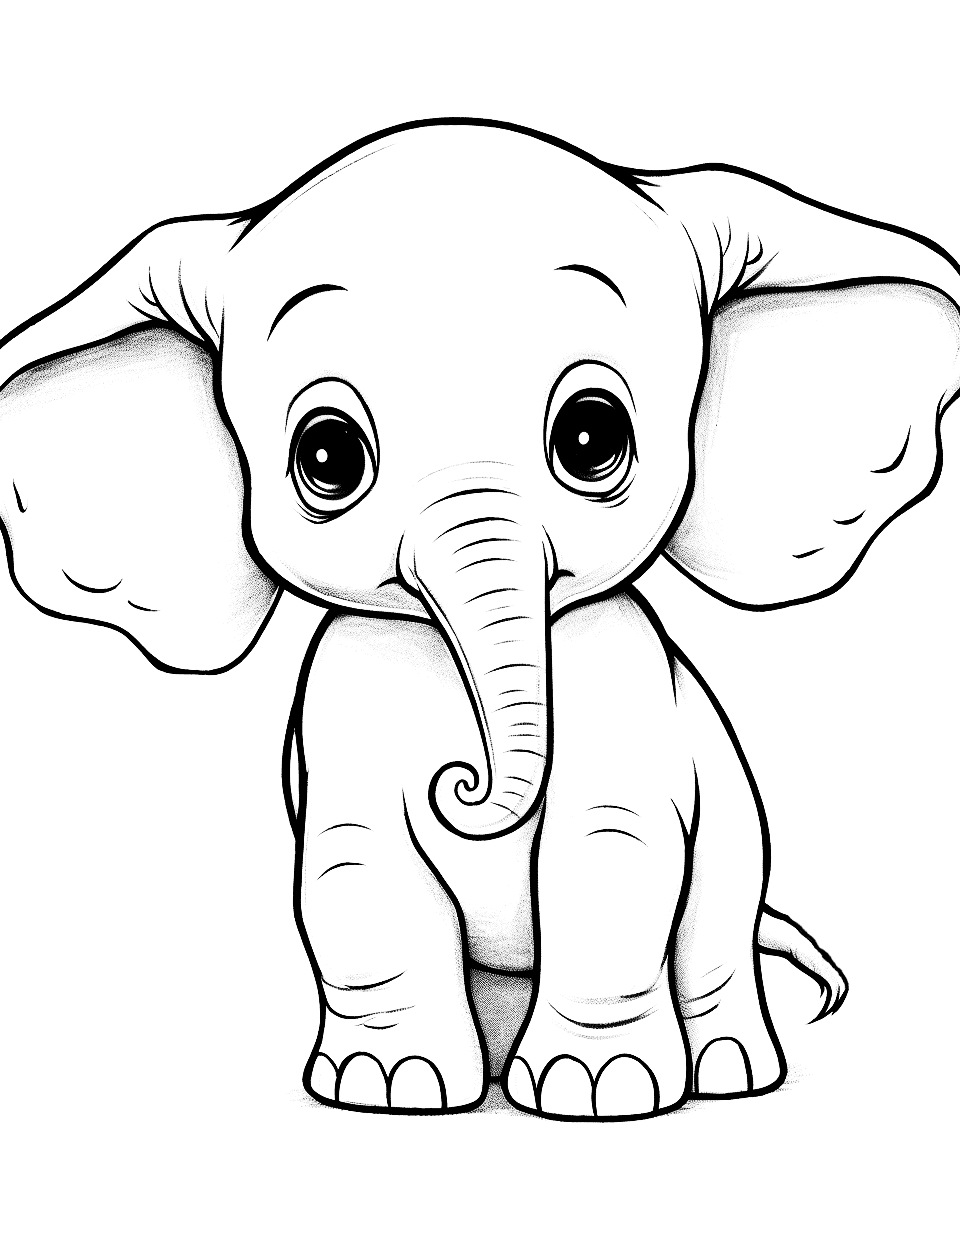 Baby Elephant Animal Coloring Page - A cute baby elephant with large ears and a tiny trunk.